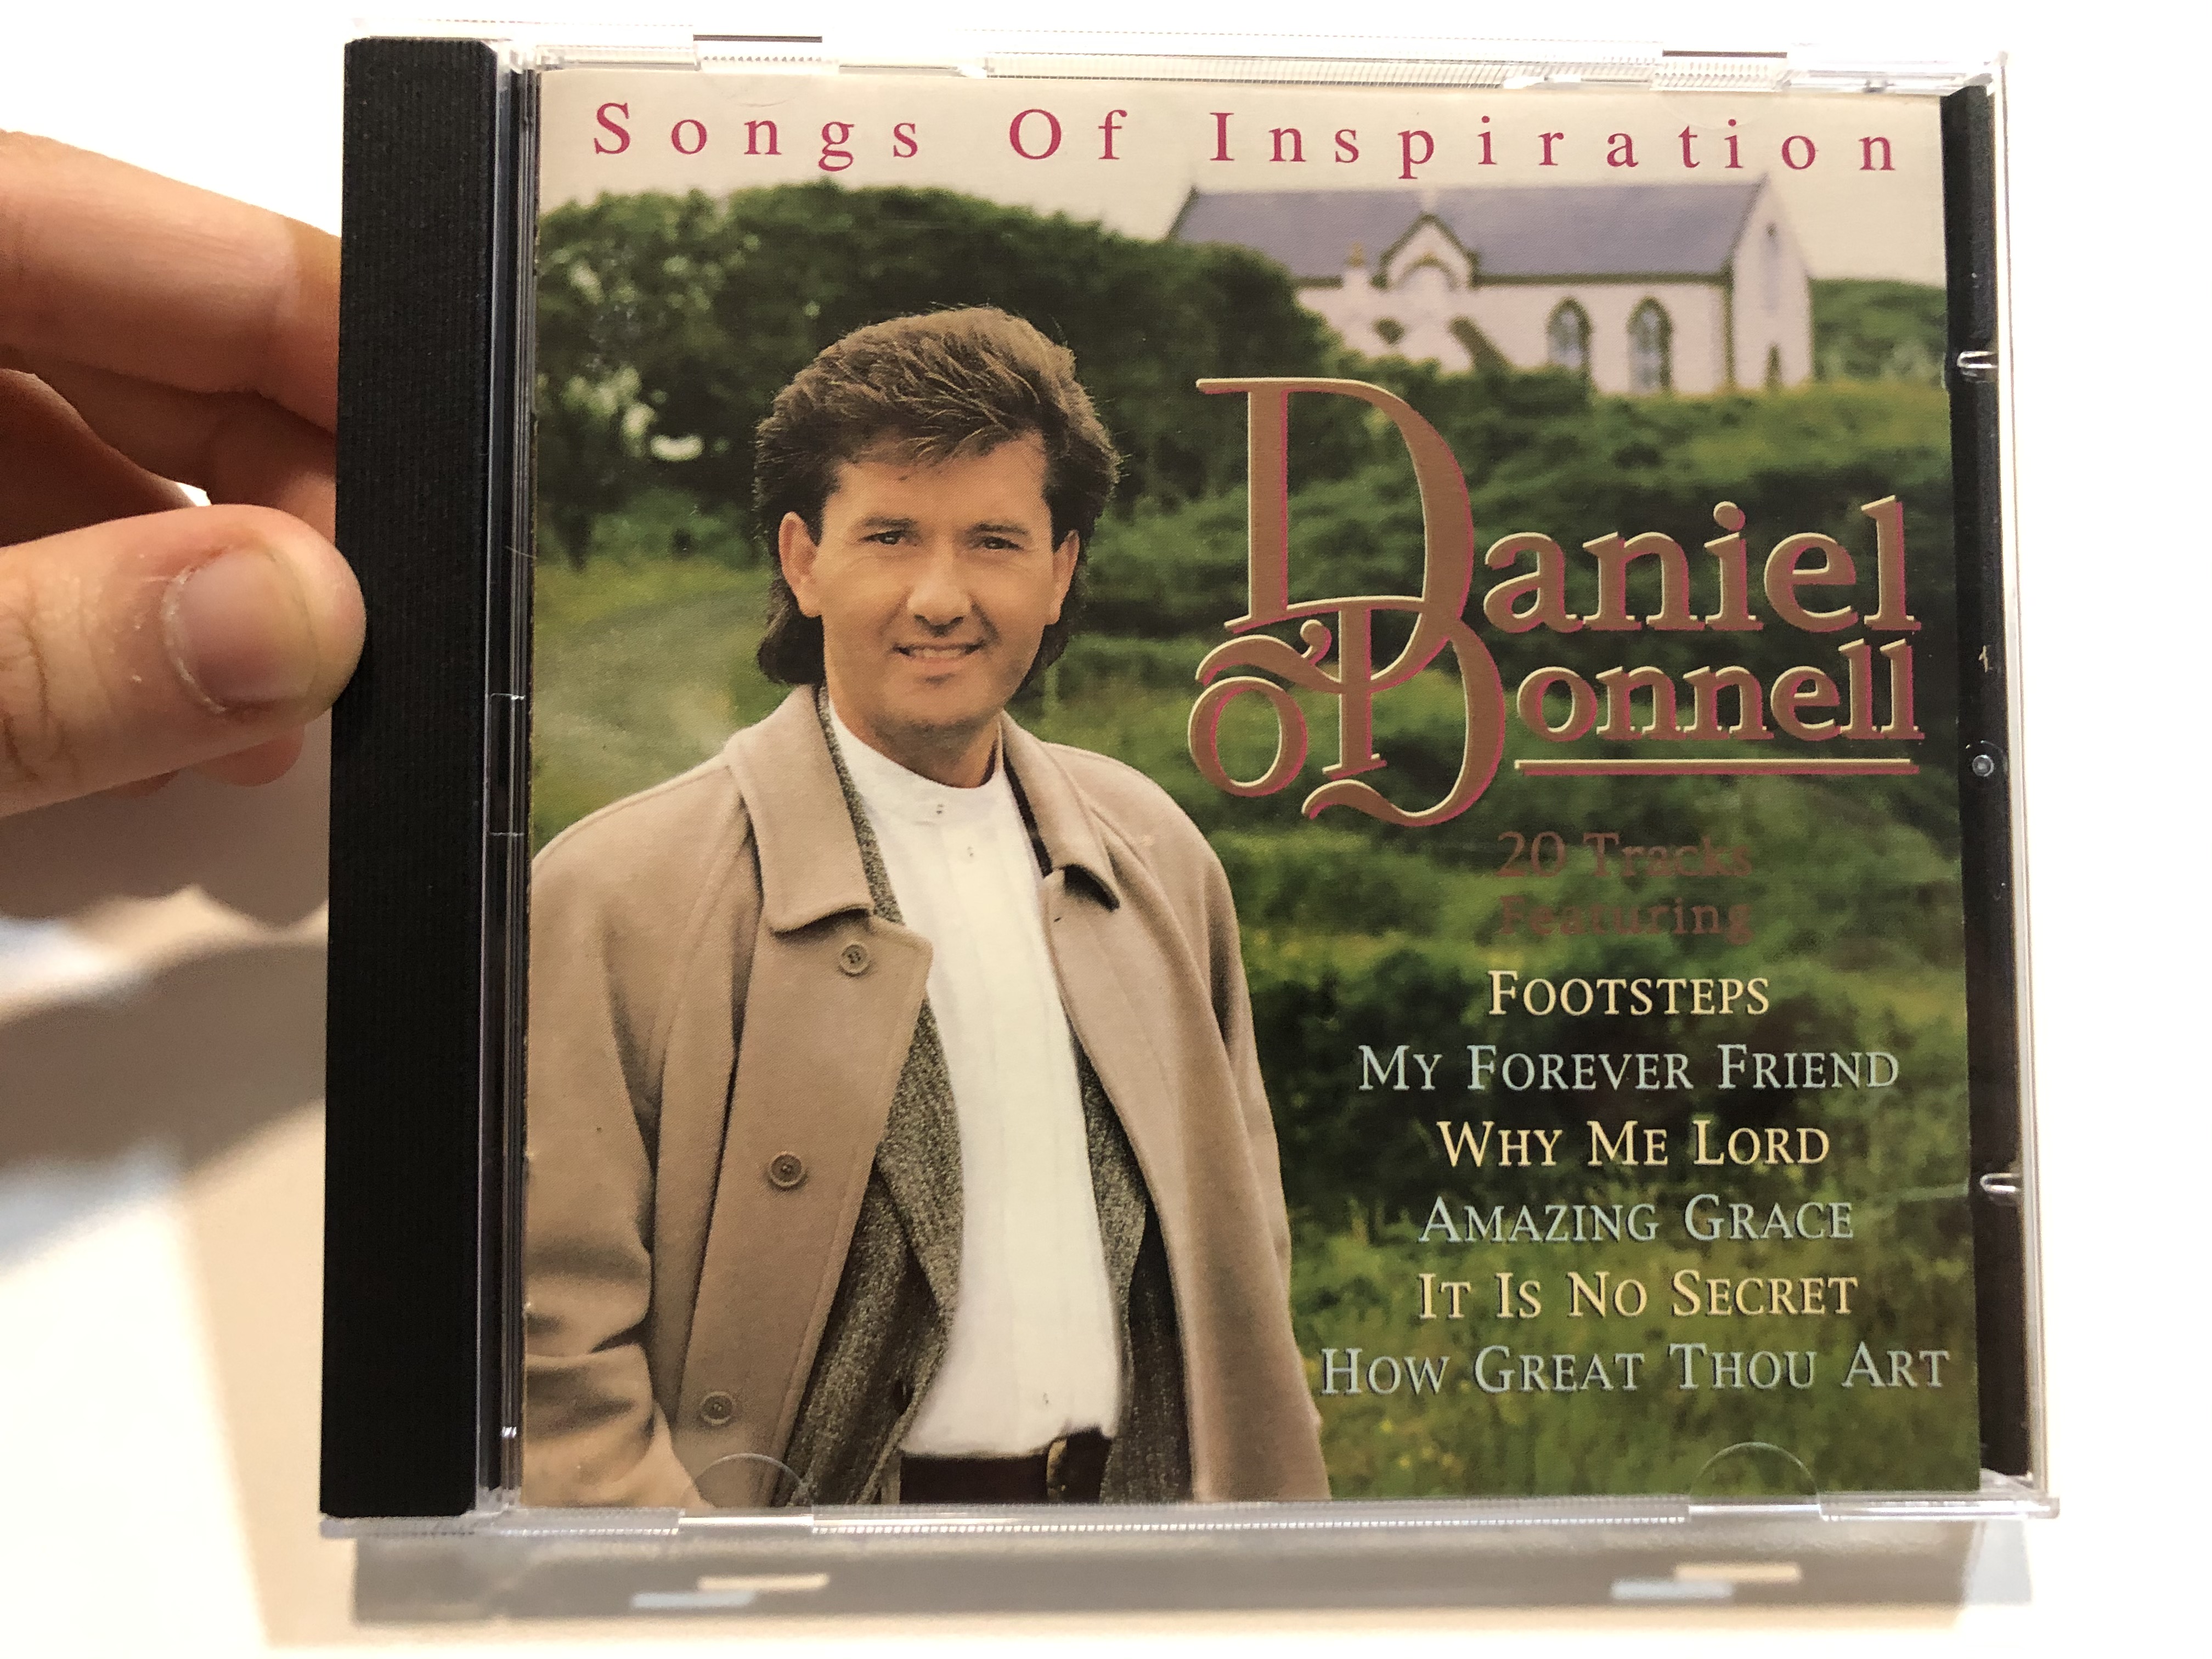 songs-of-inspiration-daniel-o-donnell-20-tracks-featuring-footsteps-my-forever-friend-why-me-lord-amazing-grace-it-is-no-secret-how-great-thou-art-ritz-records-audio-cd-1996-ritz-b-1-.jpg